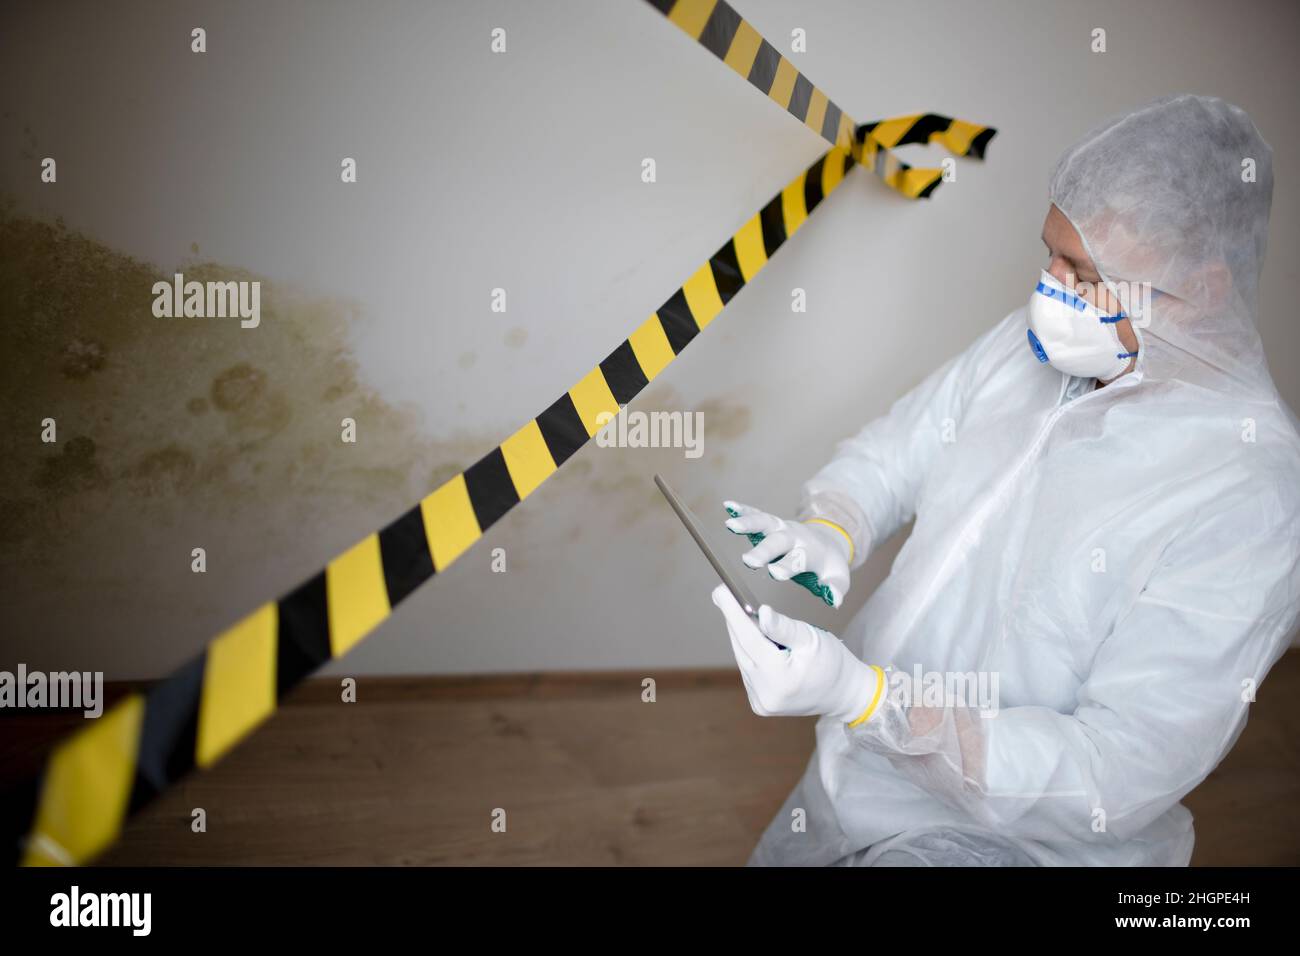 Man with white protective suit and mouth nose mask stands in front of mold on wall and works with tablet behind barrier Stock Photo